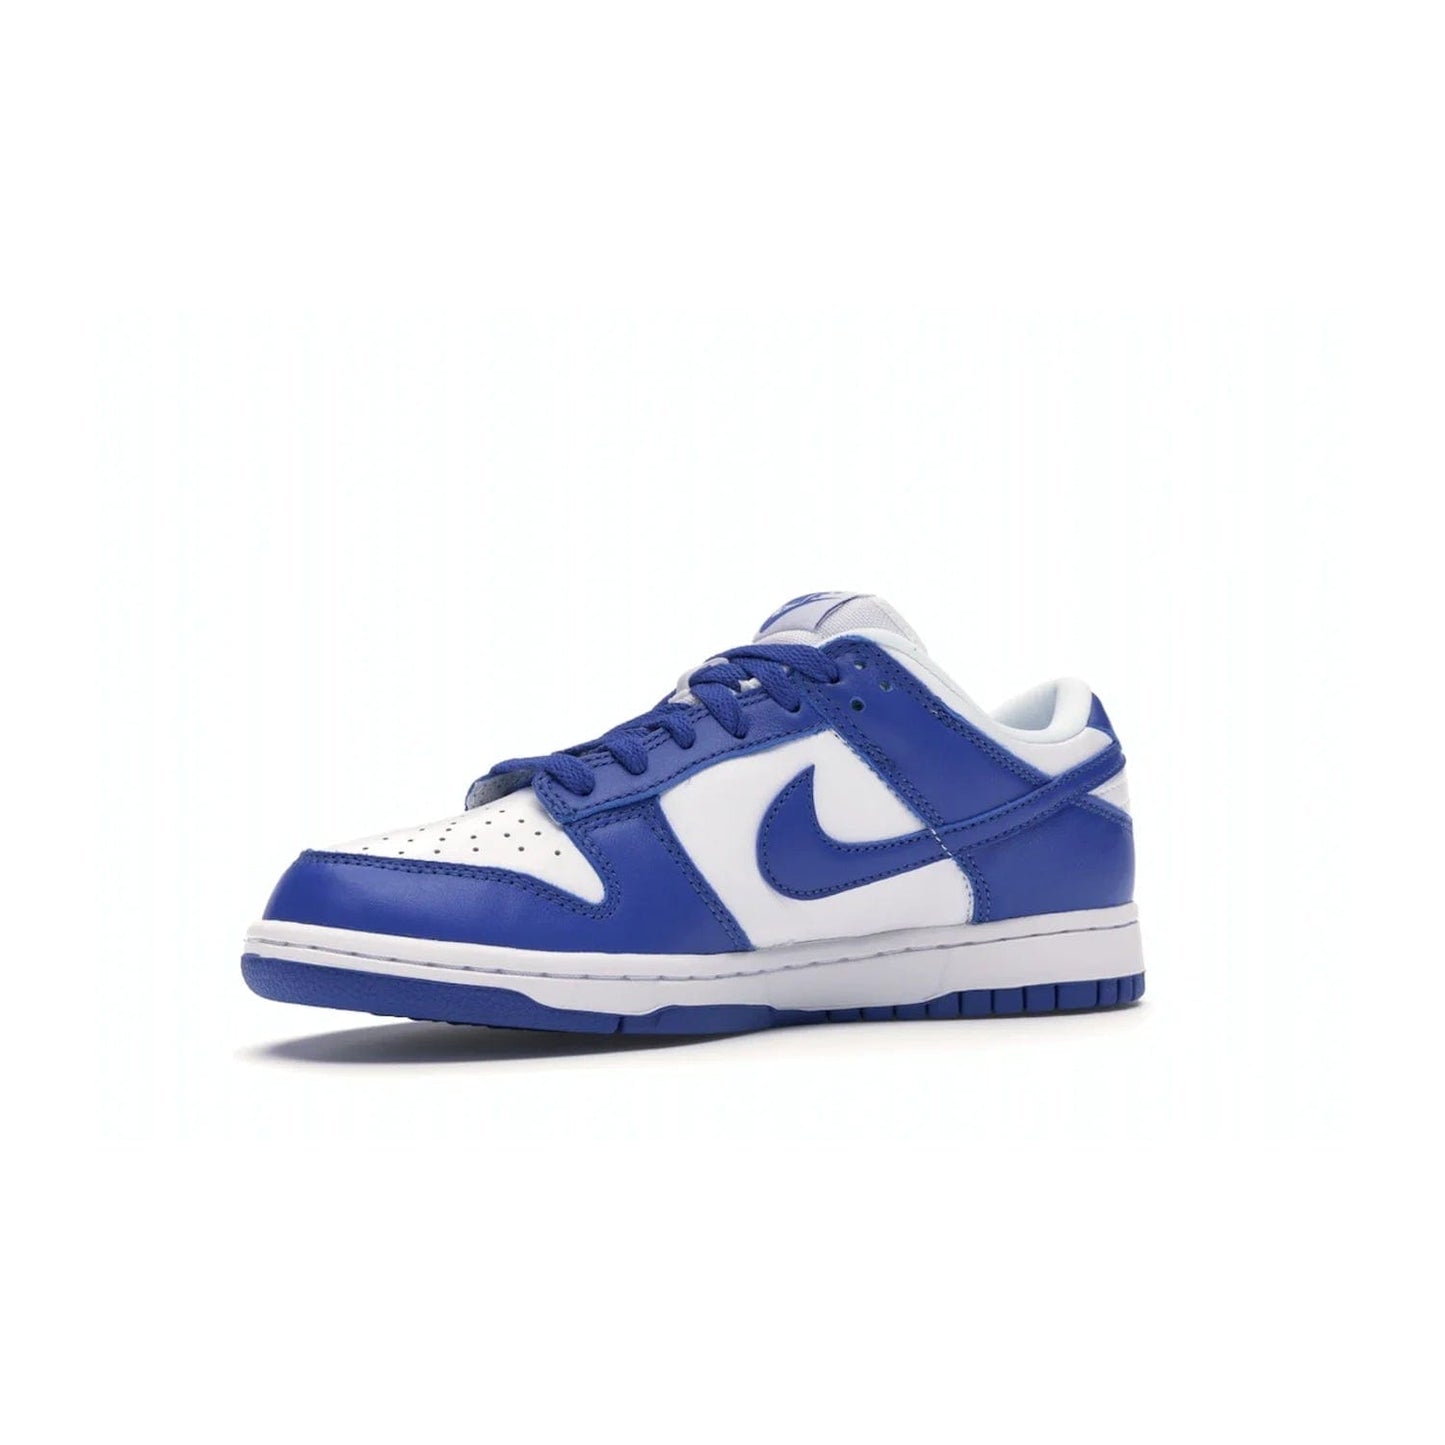 Nike Dunk Low SP Kentucky (2020/2022) - Image 16 - Only at www.BallersClubKickz.com - Classic Nike Dunk Low SP Kentucky with timeless White/Varsity Royal colorway. White leather upper, royal outsole, and Nike branding. A hit since March 2020 homage to the 1985 Nike College Colors program. Show your support with these classic kicks.